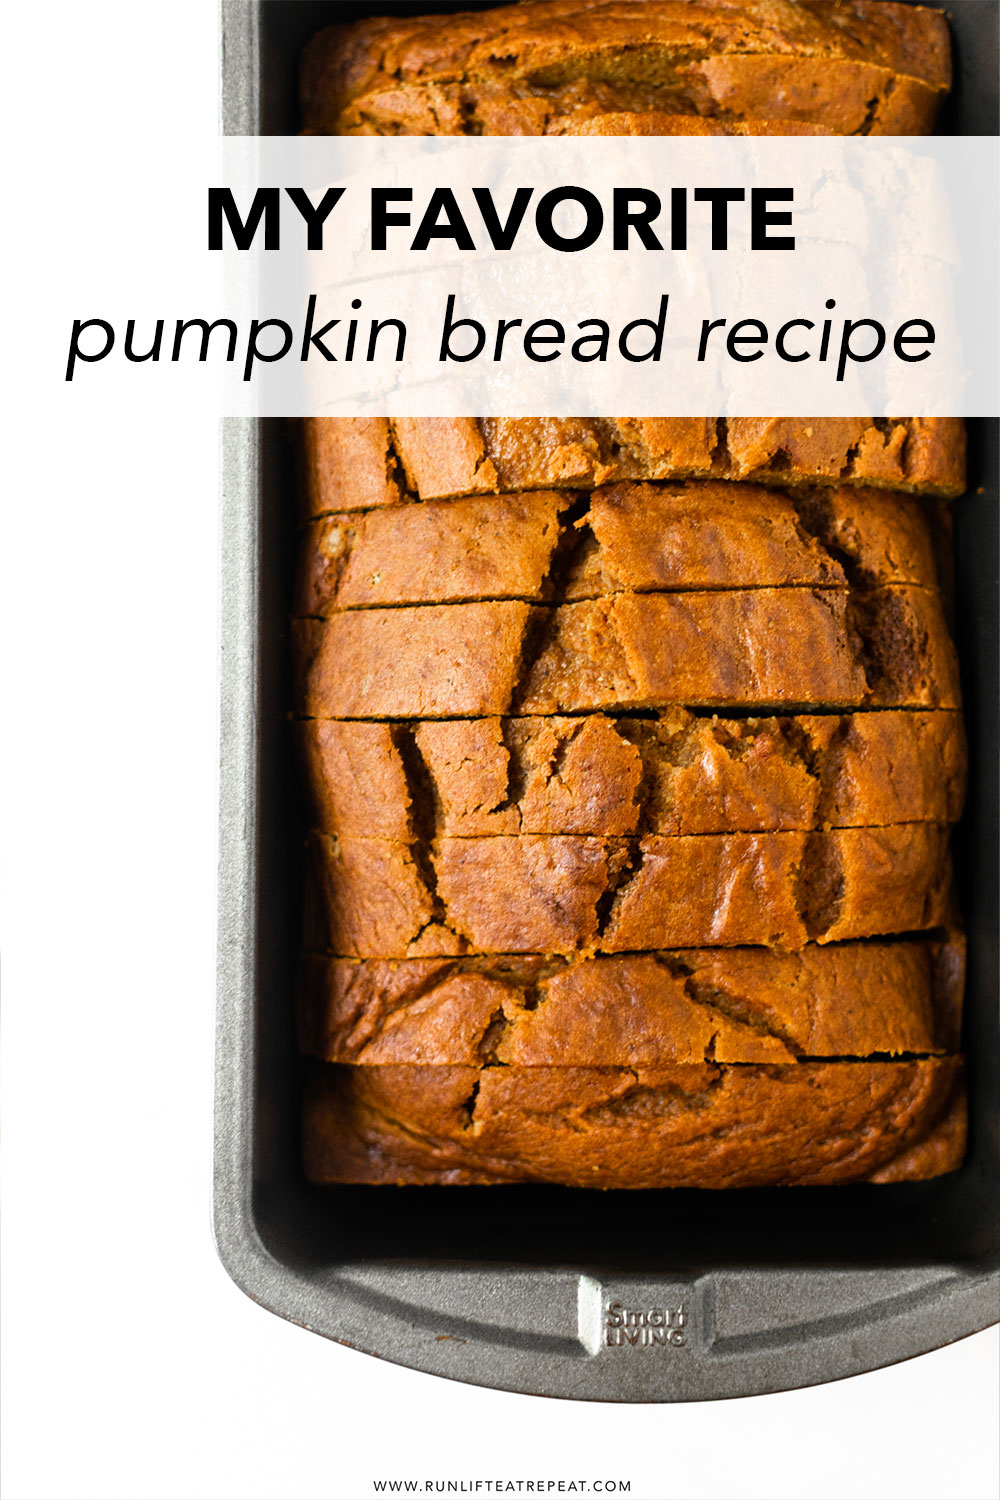 Homemade pumpkin bread is a fall staple for many— packed with classic fall flavors like cinnamon spice, allspice, cloves and tons of pumpkin. This is guaranteed to be the most flavorful pumpkin bread recipe that you've ever had!